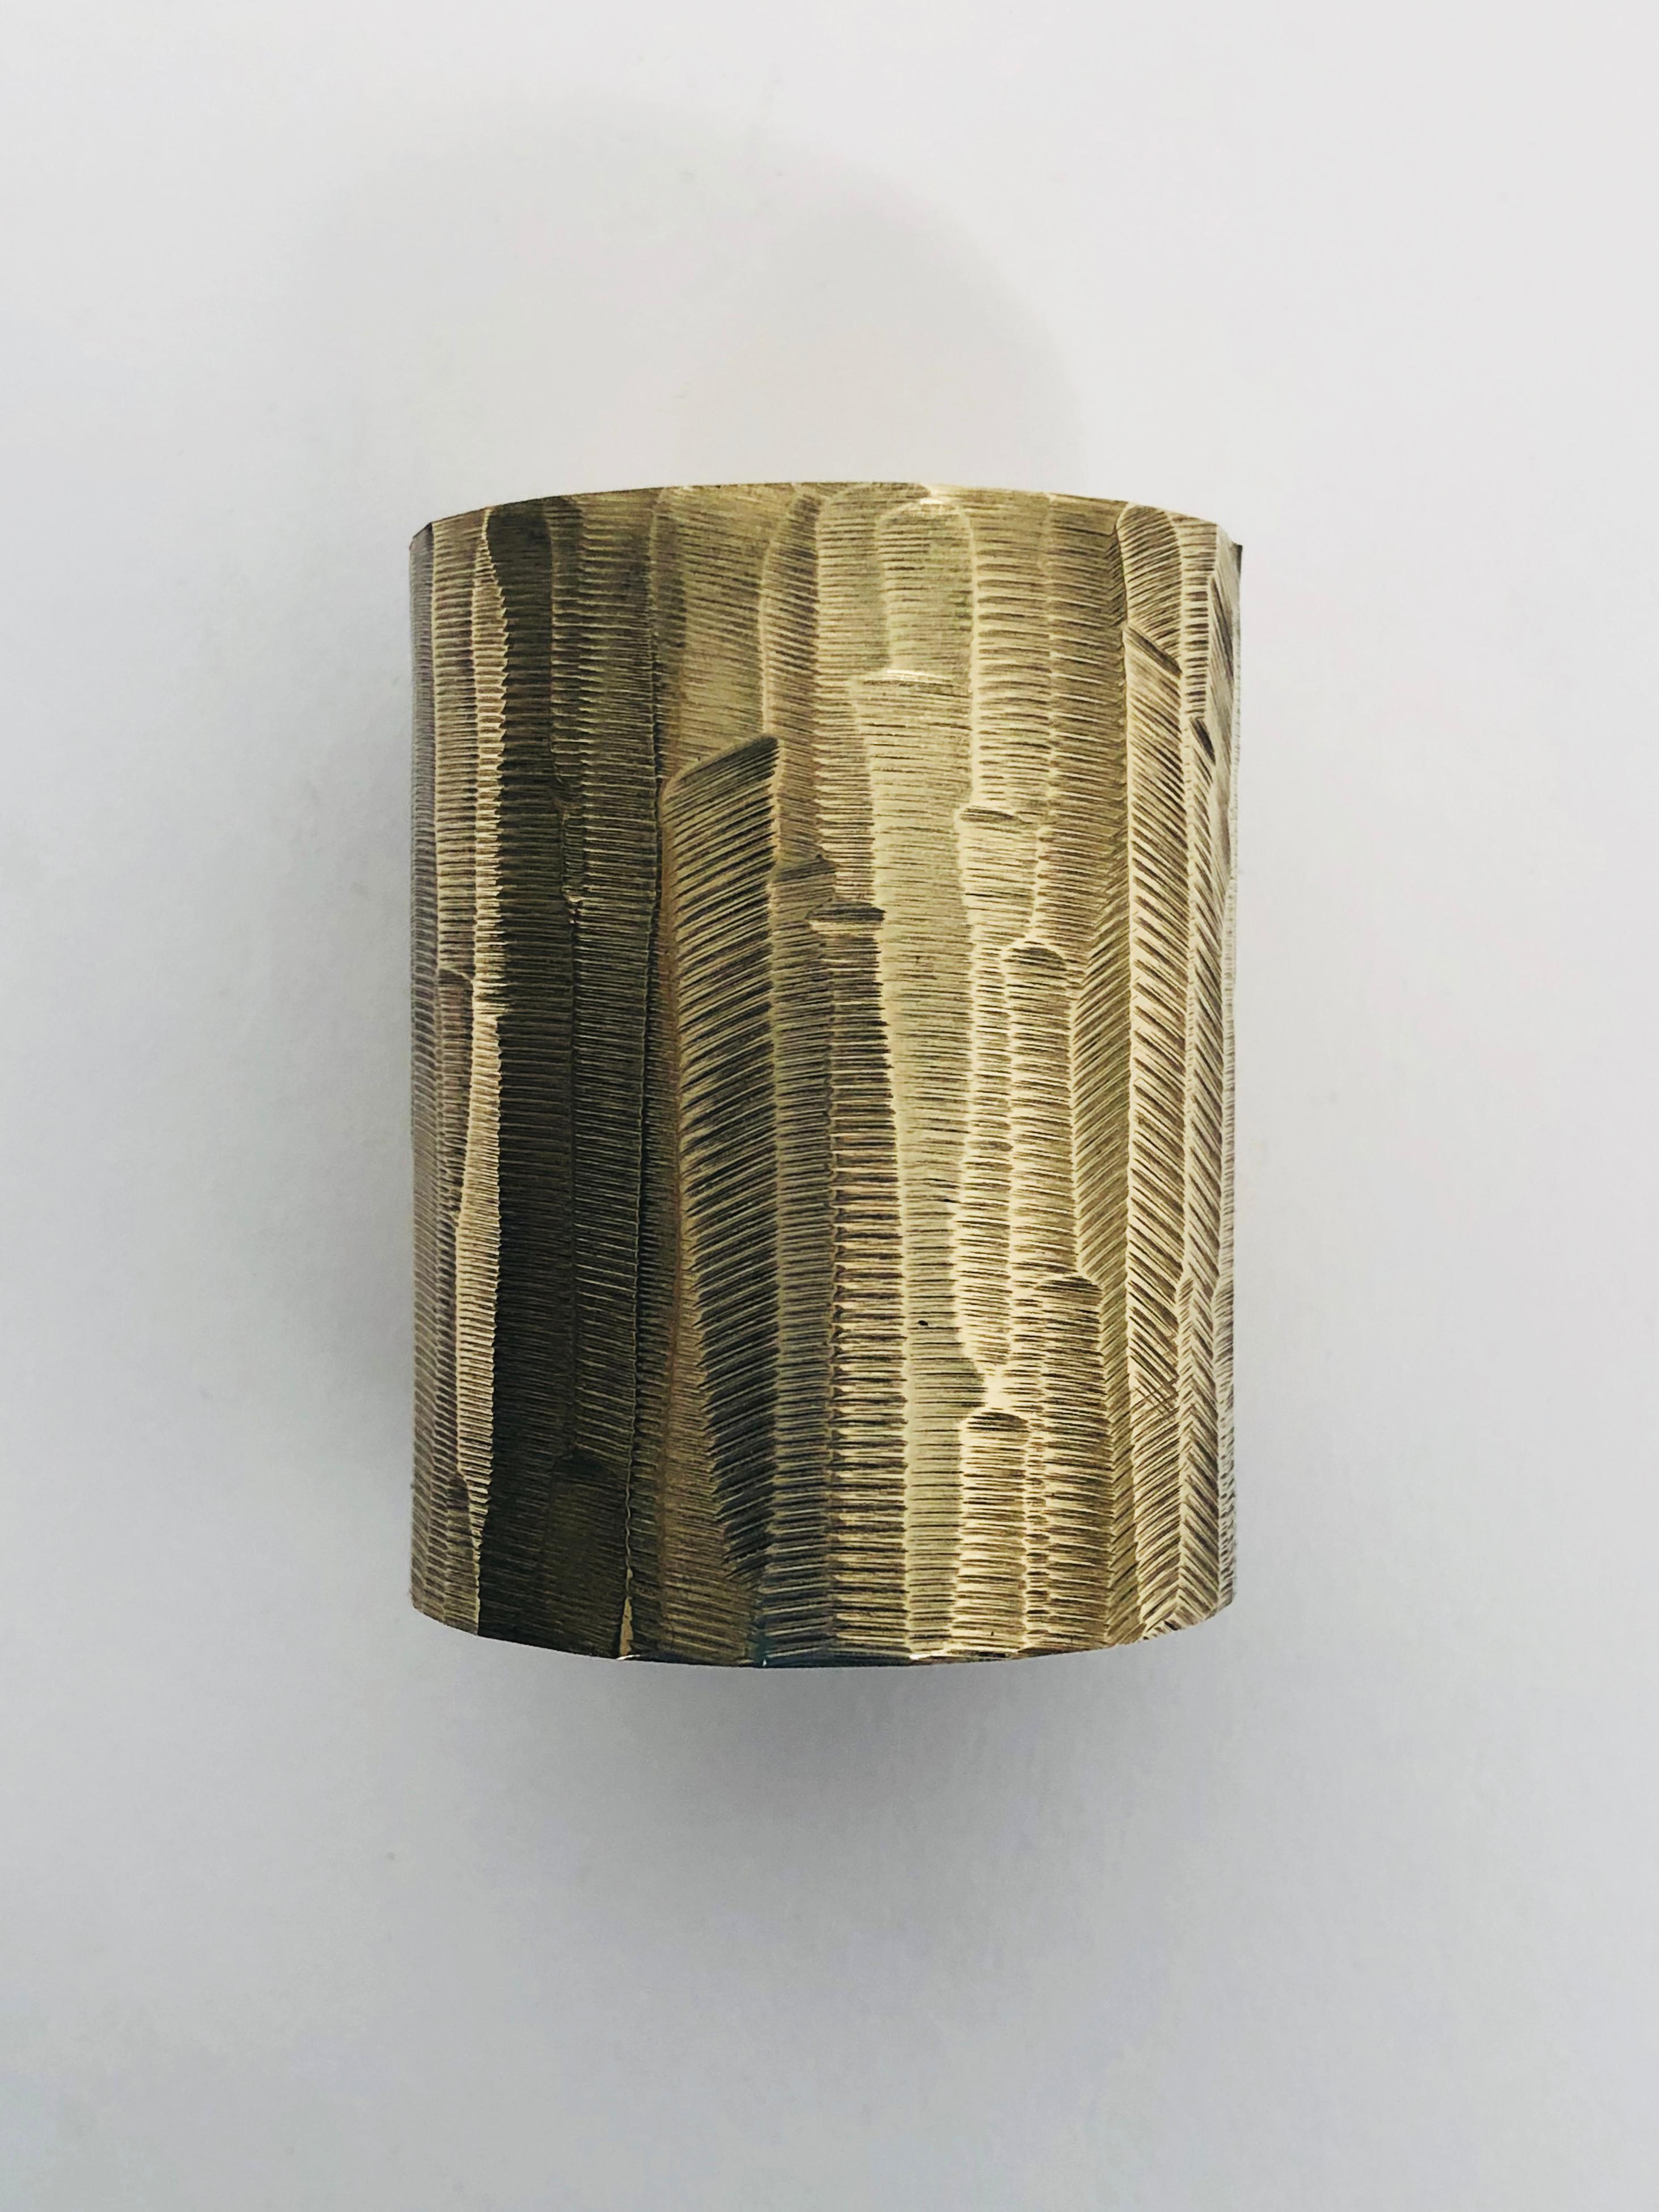 Solid brass sculpted censer by William Guillon
Signed: William Guillon
Dimensions: Diameter 4 x height 5 cm
Diameter 3.5 x height 6 cm
Materials: Solid brass raw finish or patinated black, with polished edge
Hand-sculpted in France

Those